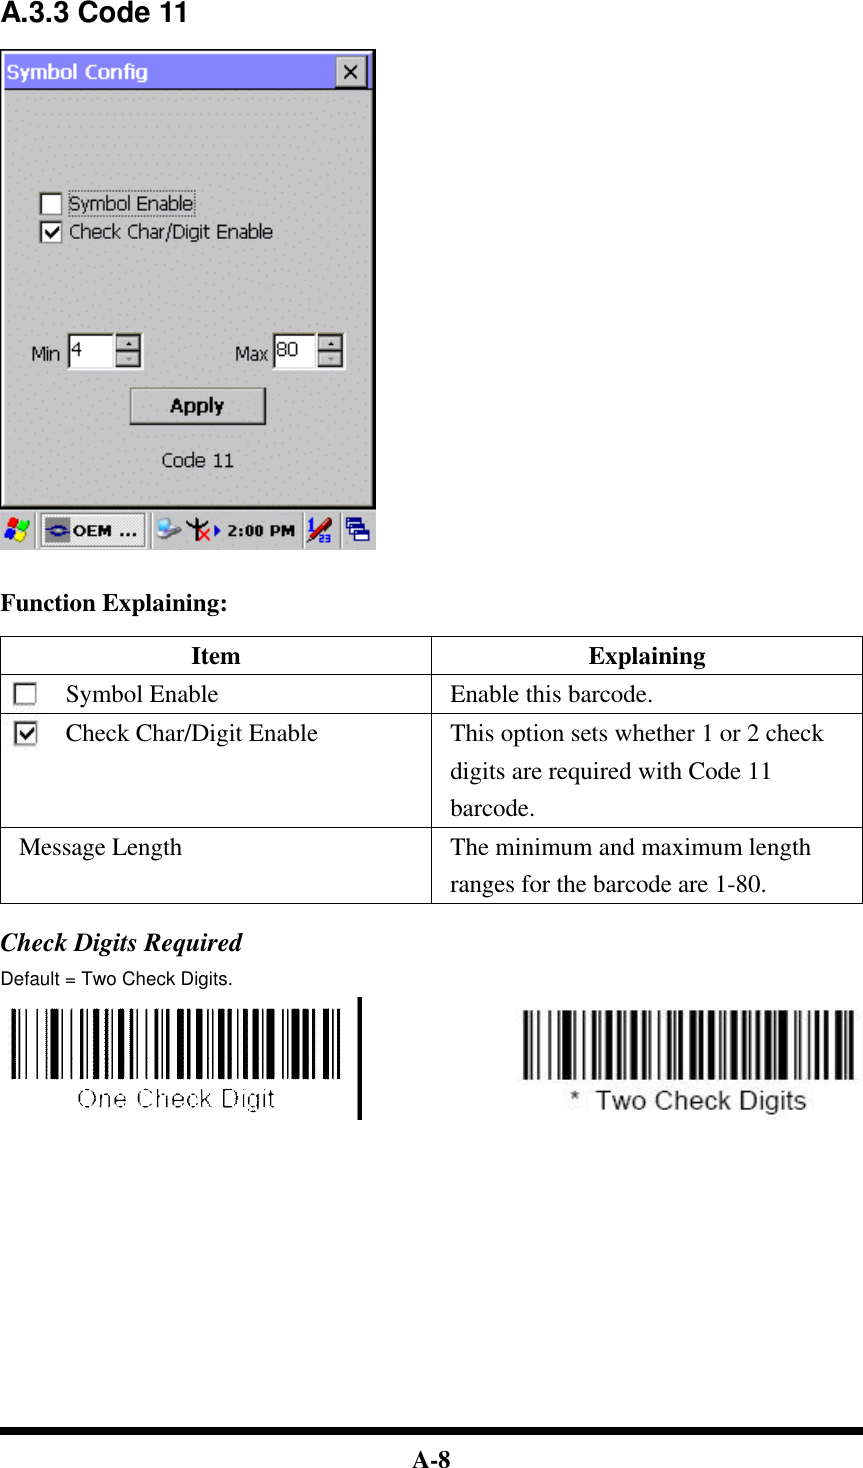  A-8  A.3.3 Code 11     Function Explaining:  Item Explaining Symbol Enable Enable this barcode. Check Char/Digit Enable This option sets whether 1 or 2 check digits are required with Code 11 barcode. Message Length The minimum and maximum length ranges for the barcode are 1-80.  Check Digits Required Default = Two Check Digits.                                    